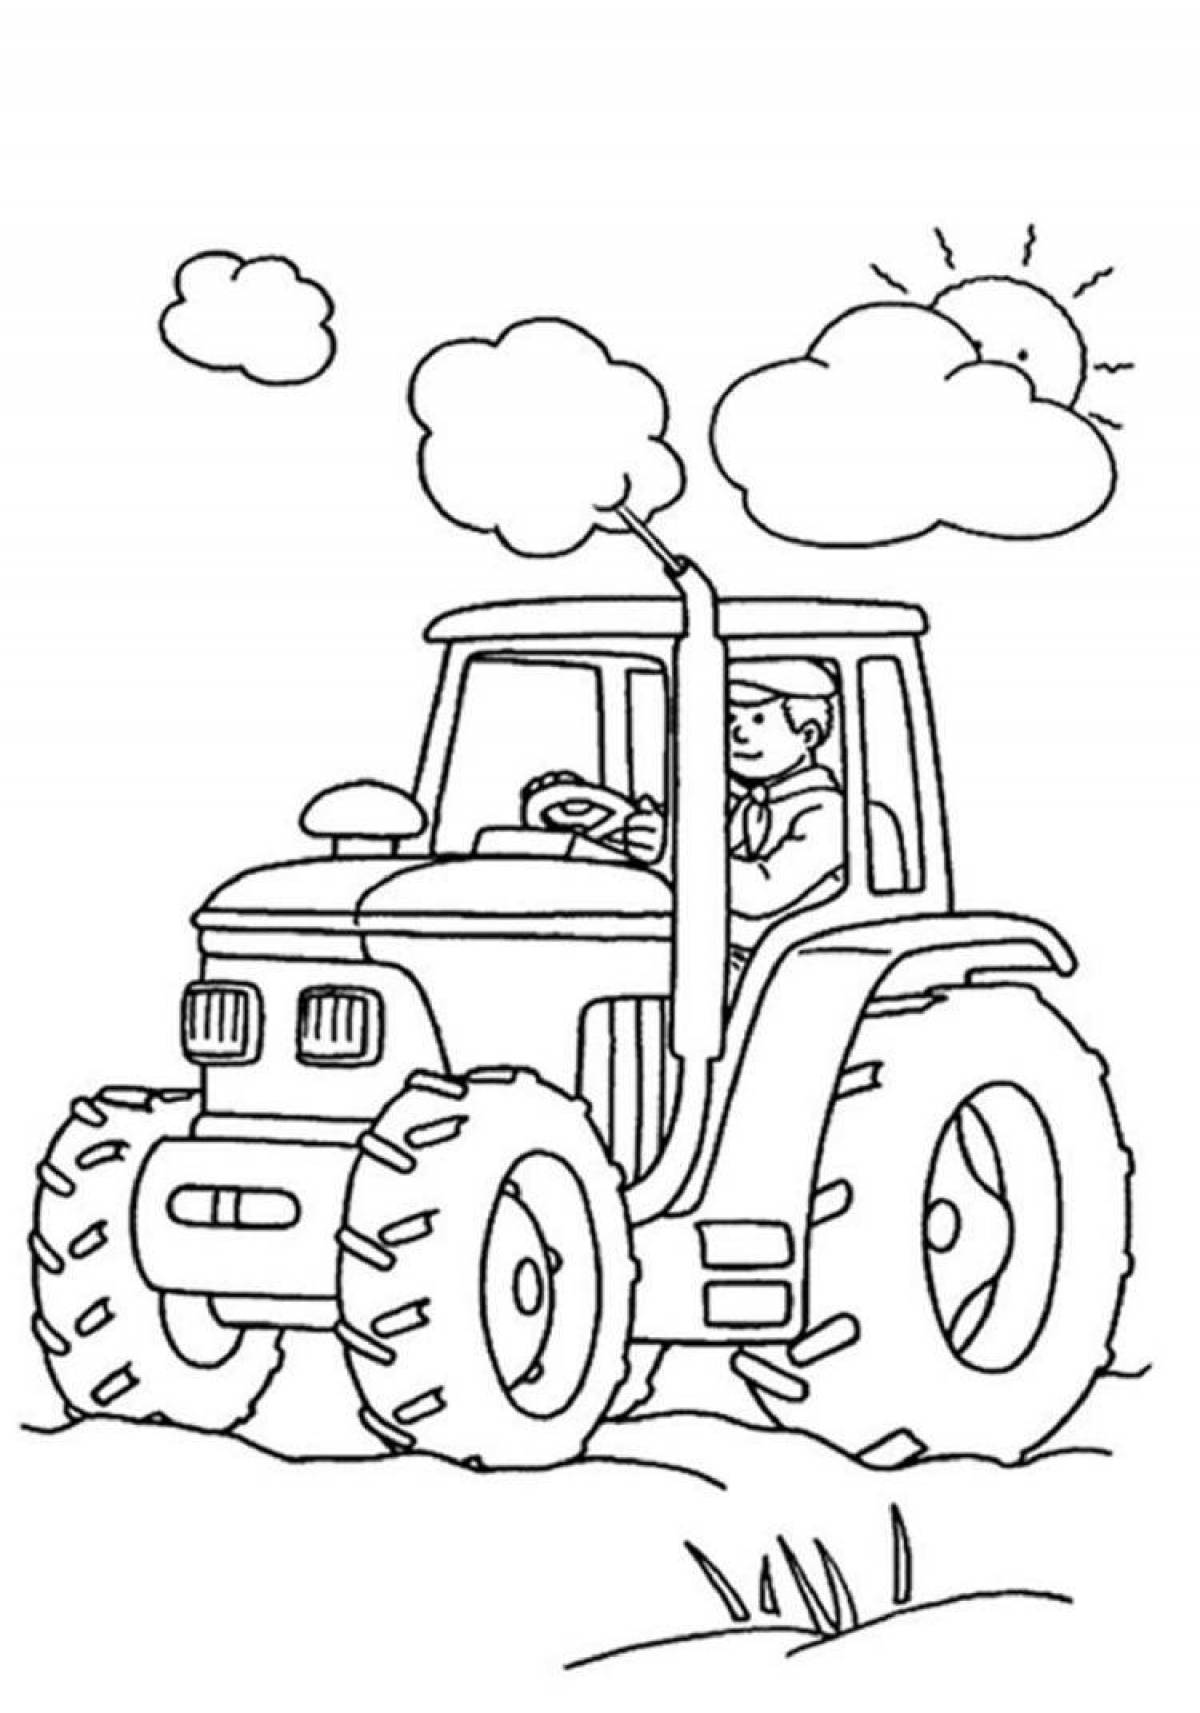 Coloring page charming mtz 80